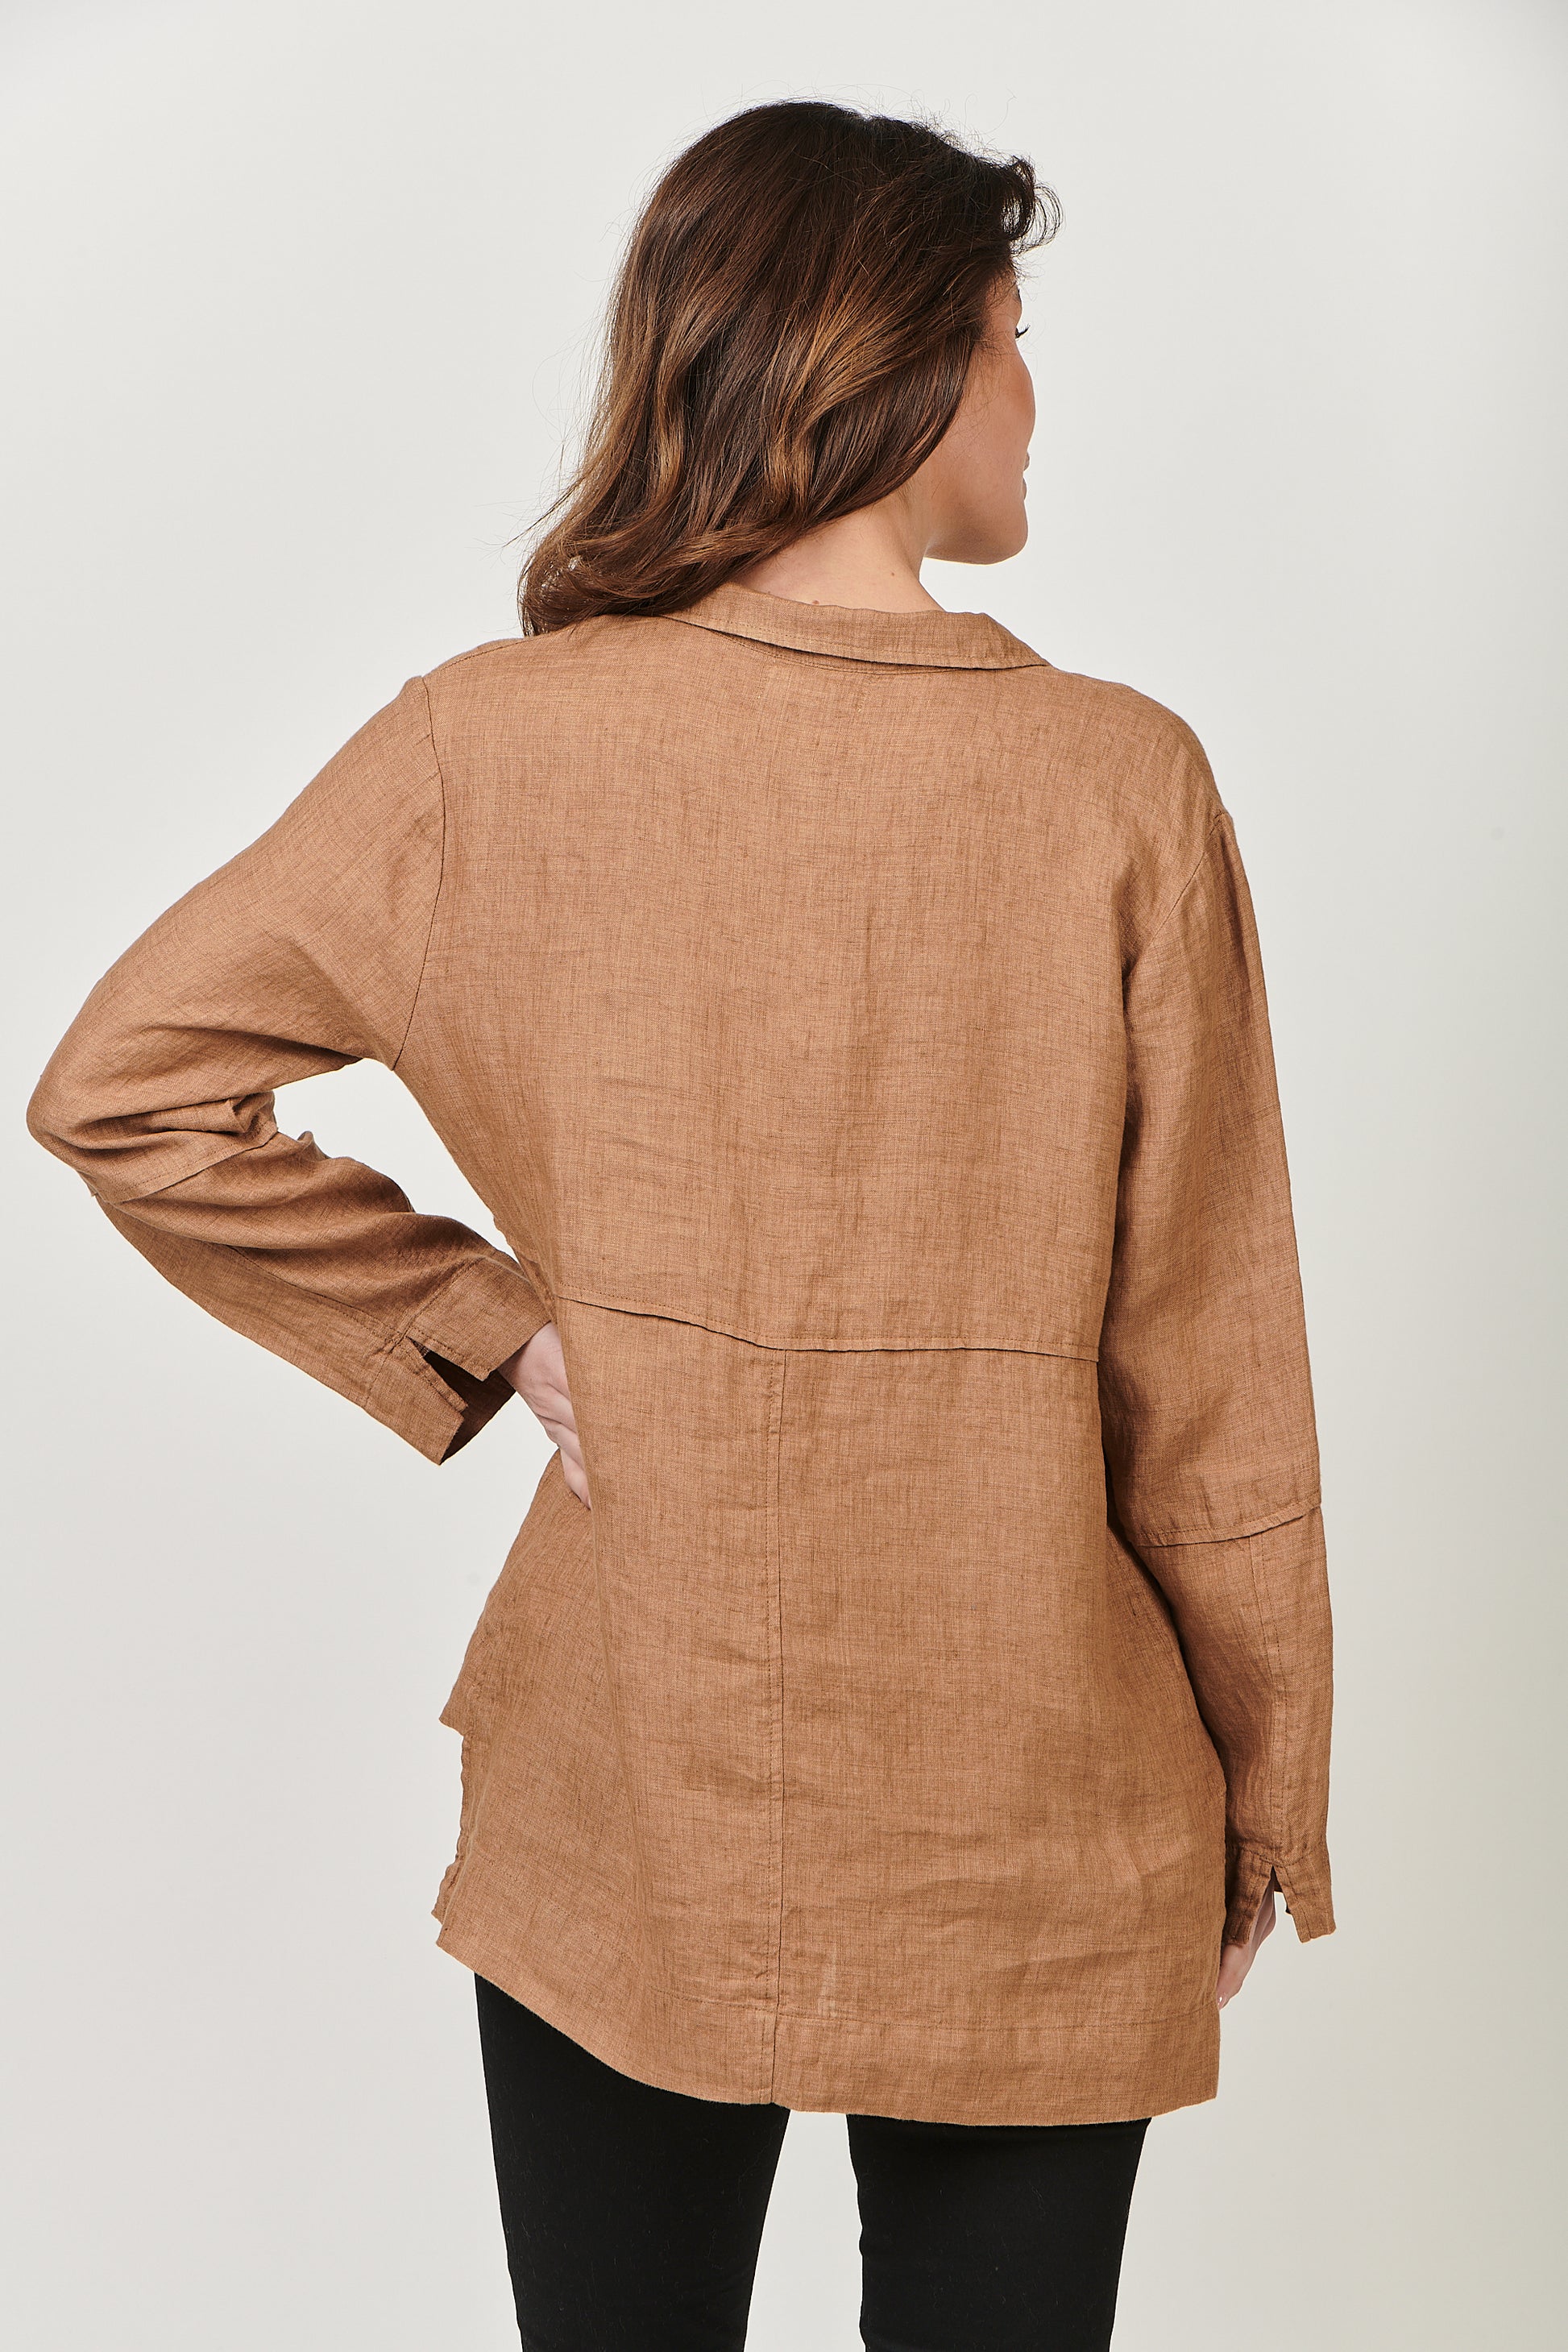 Naturals by O & J Linen Shirt in Chai back